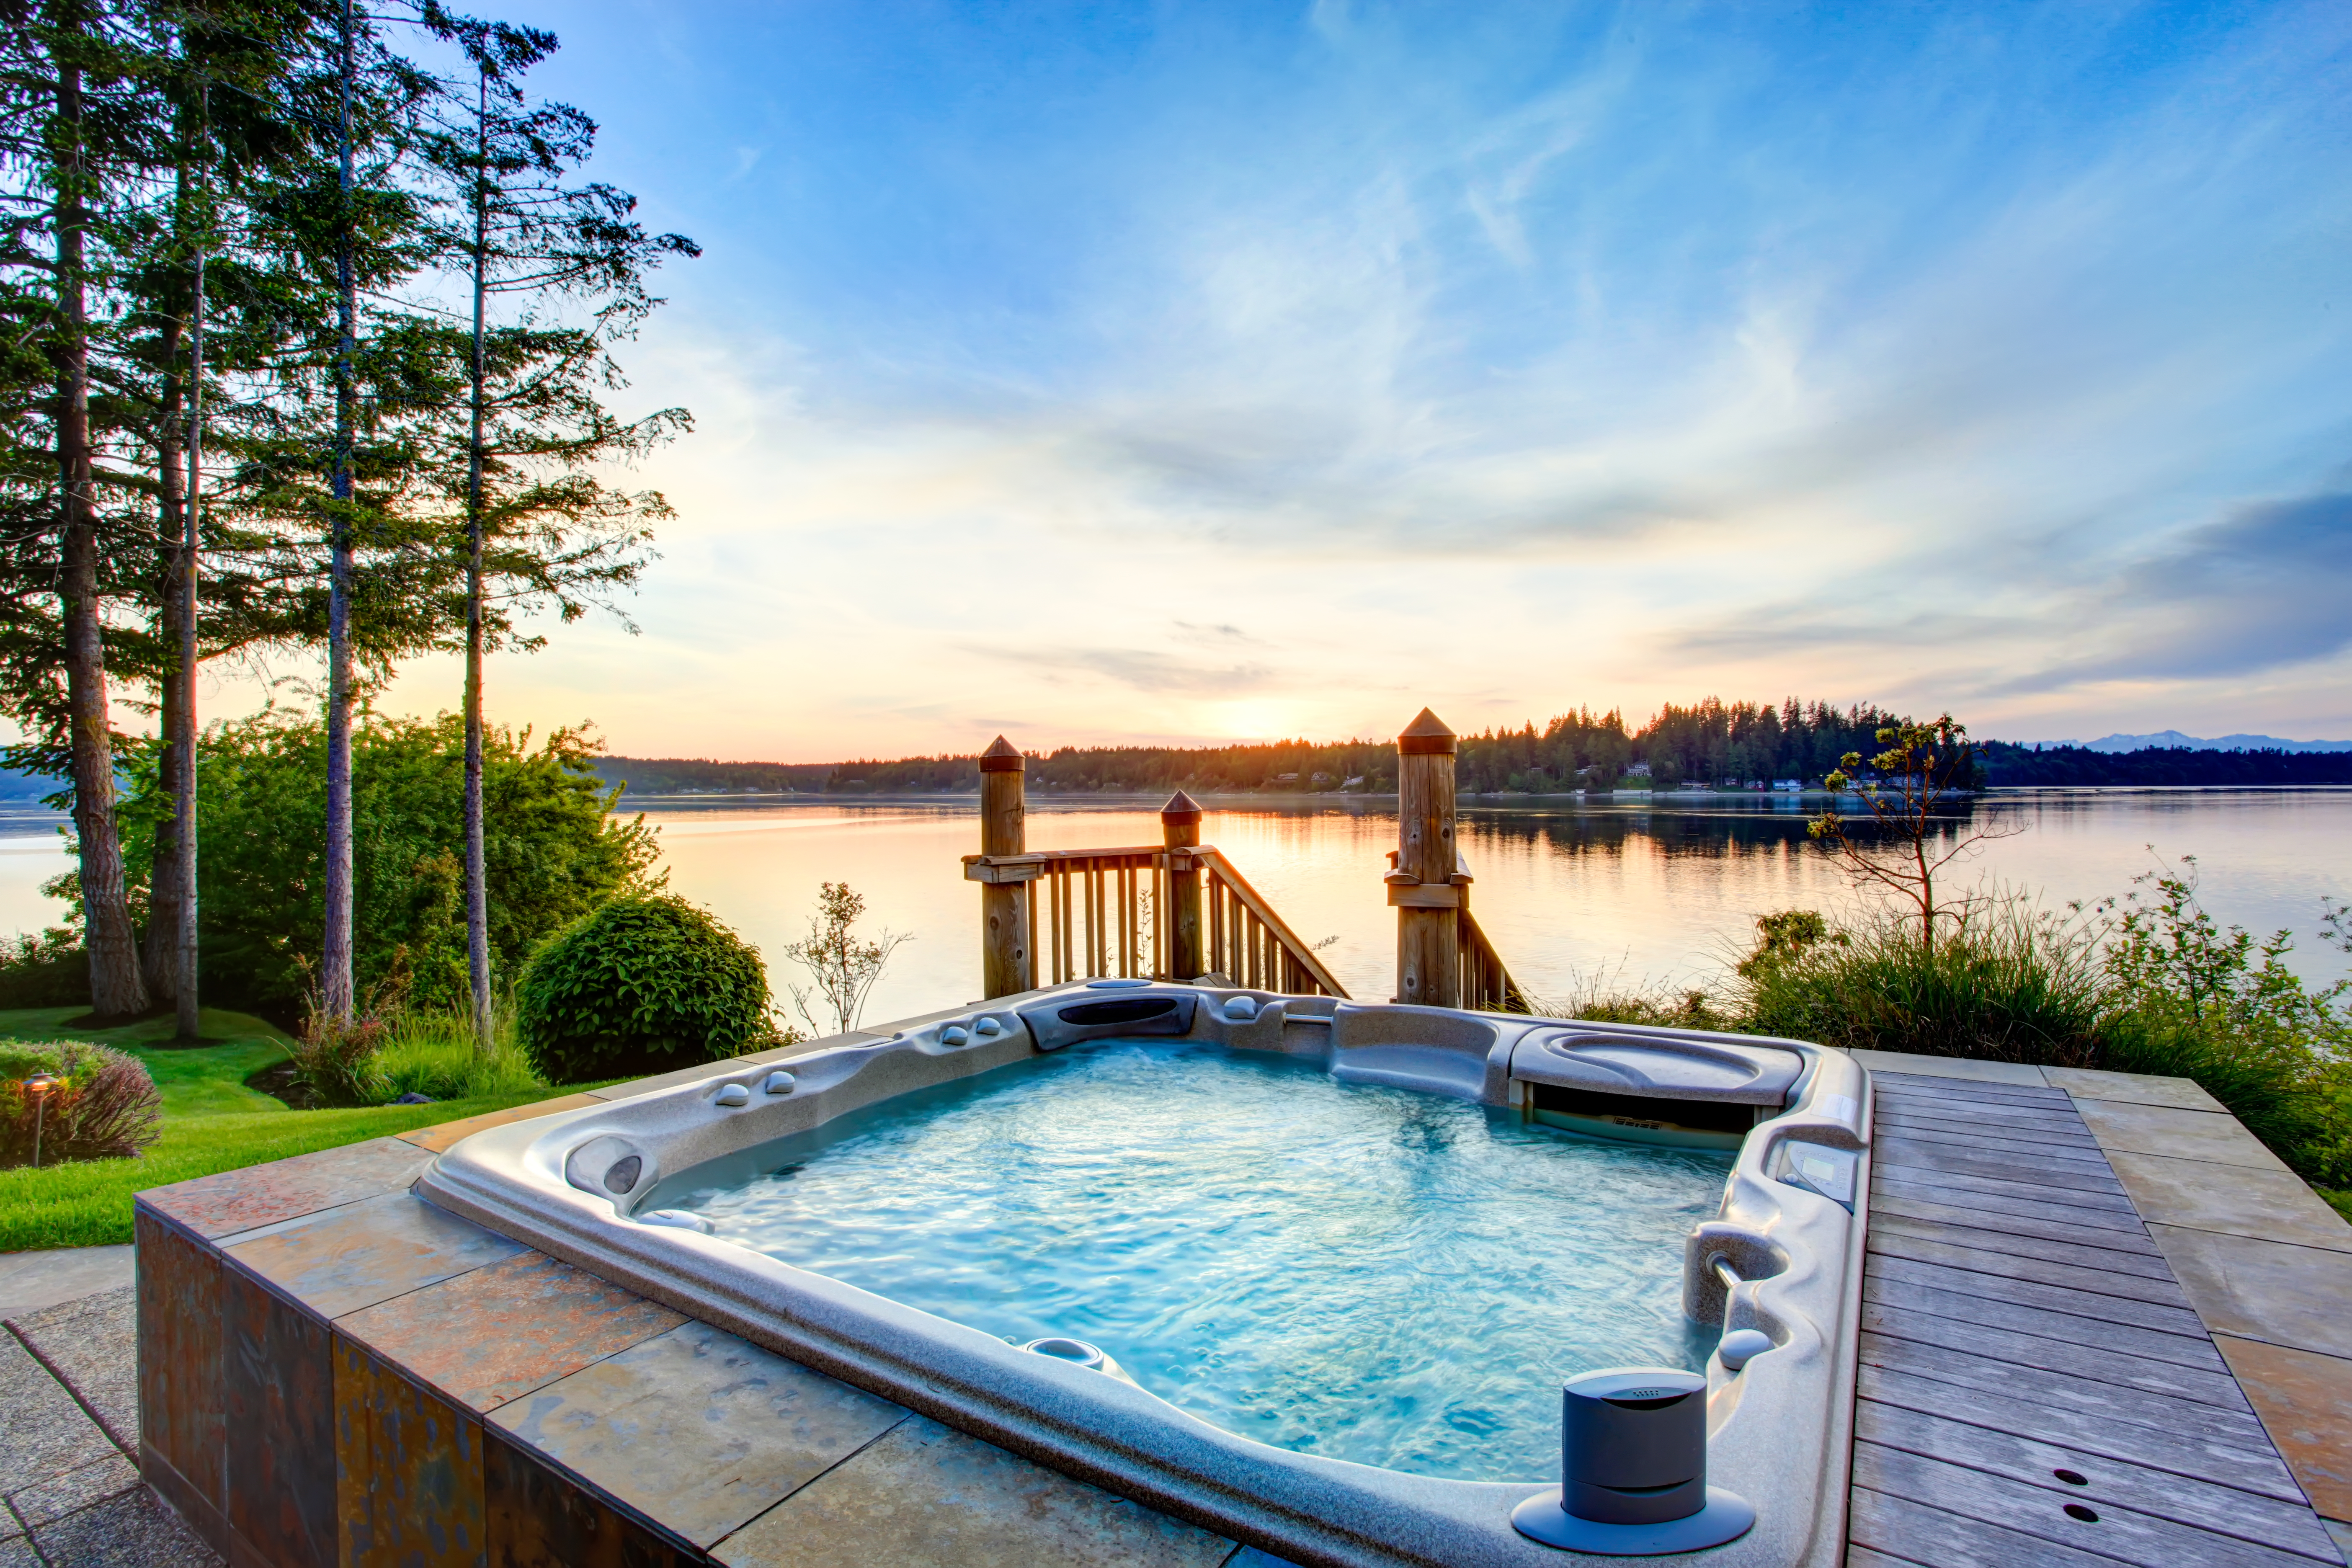 How to Convert a Hot Tub to a Cool Plunge